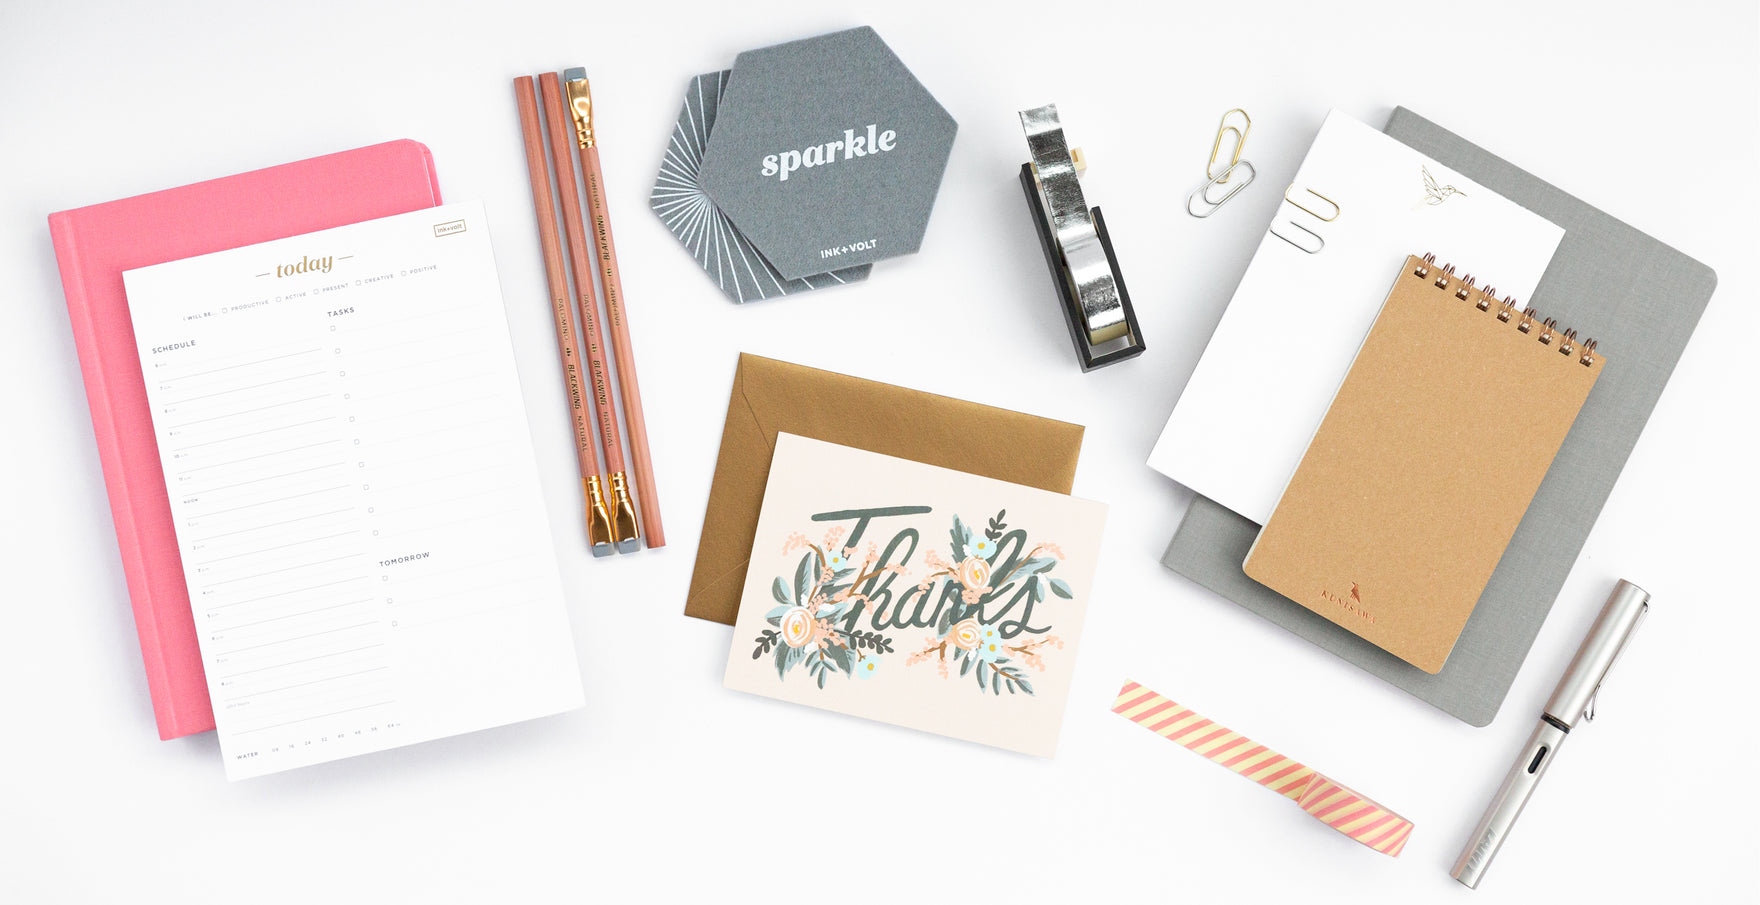 A collection of office accessories: a daily organizer pad, pencils, coasters, thank you cards, paper clips, and pens.